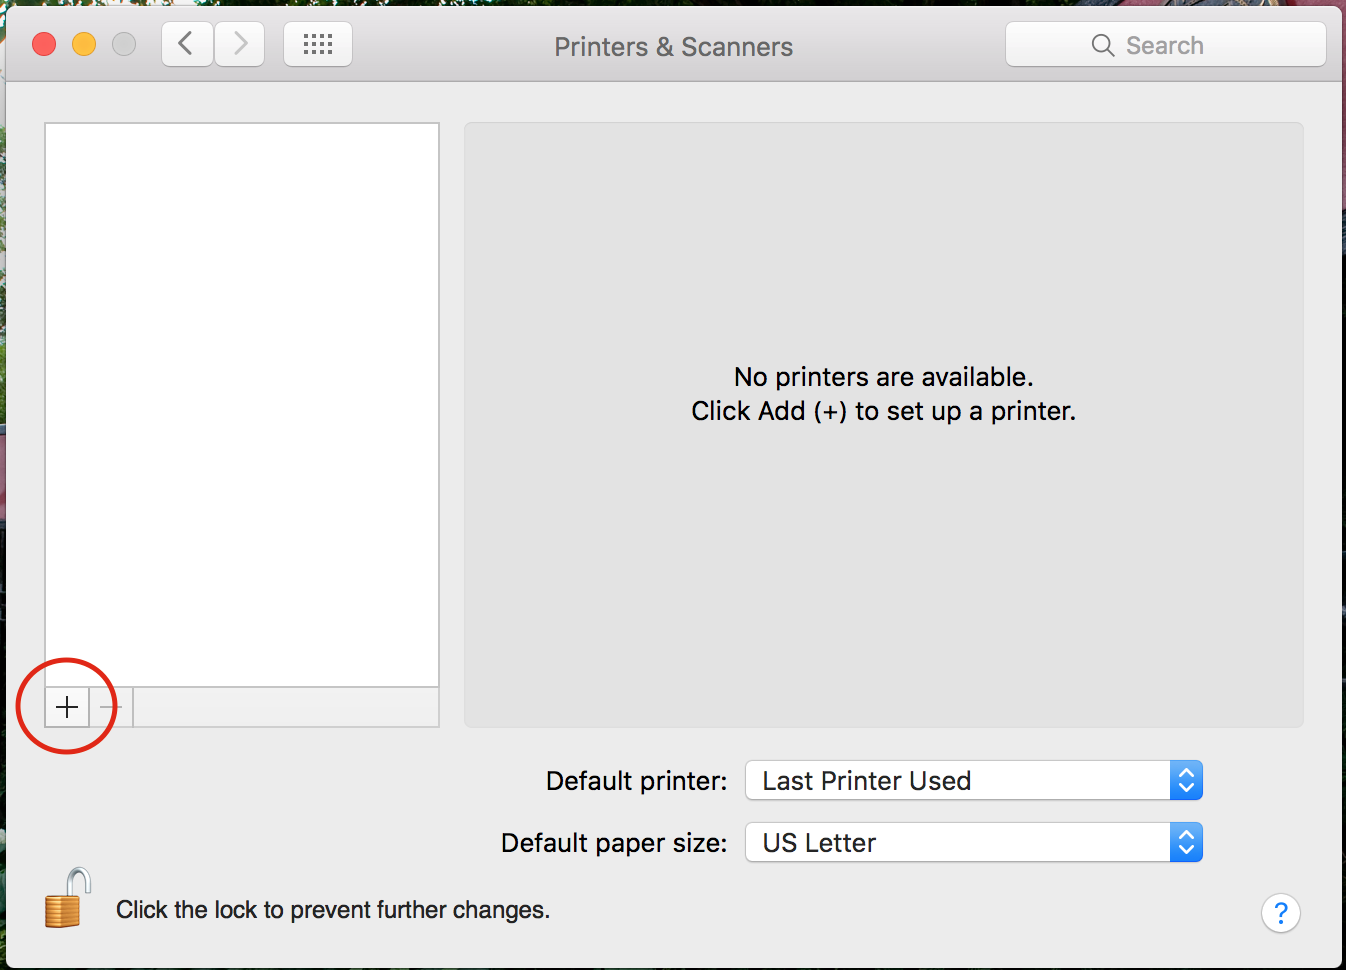 The Printers & Scanners section of System Preferences is opened. The "Plus" (+) button at the bottom of the printers list is circled.